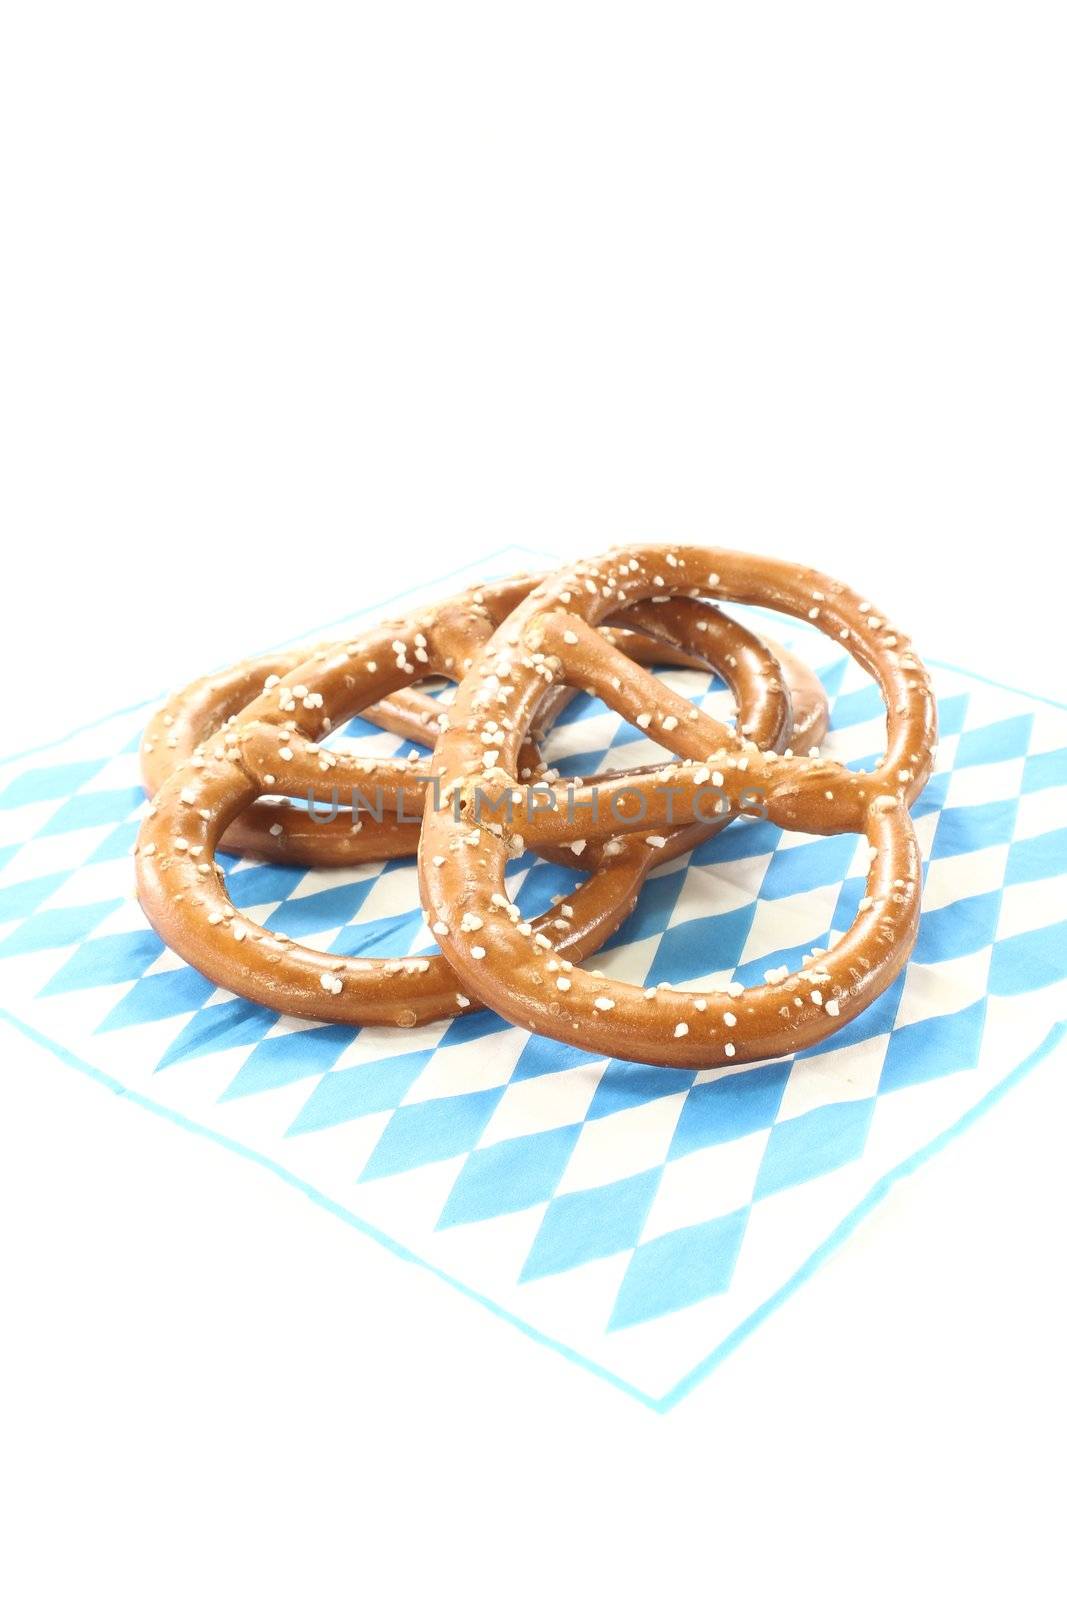 Pretzels by discovery